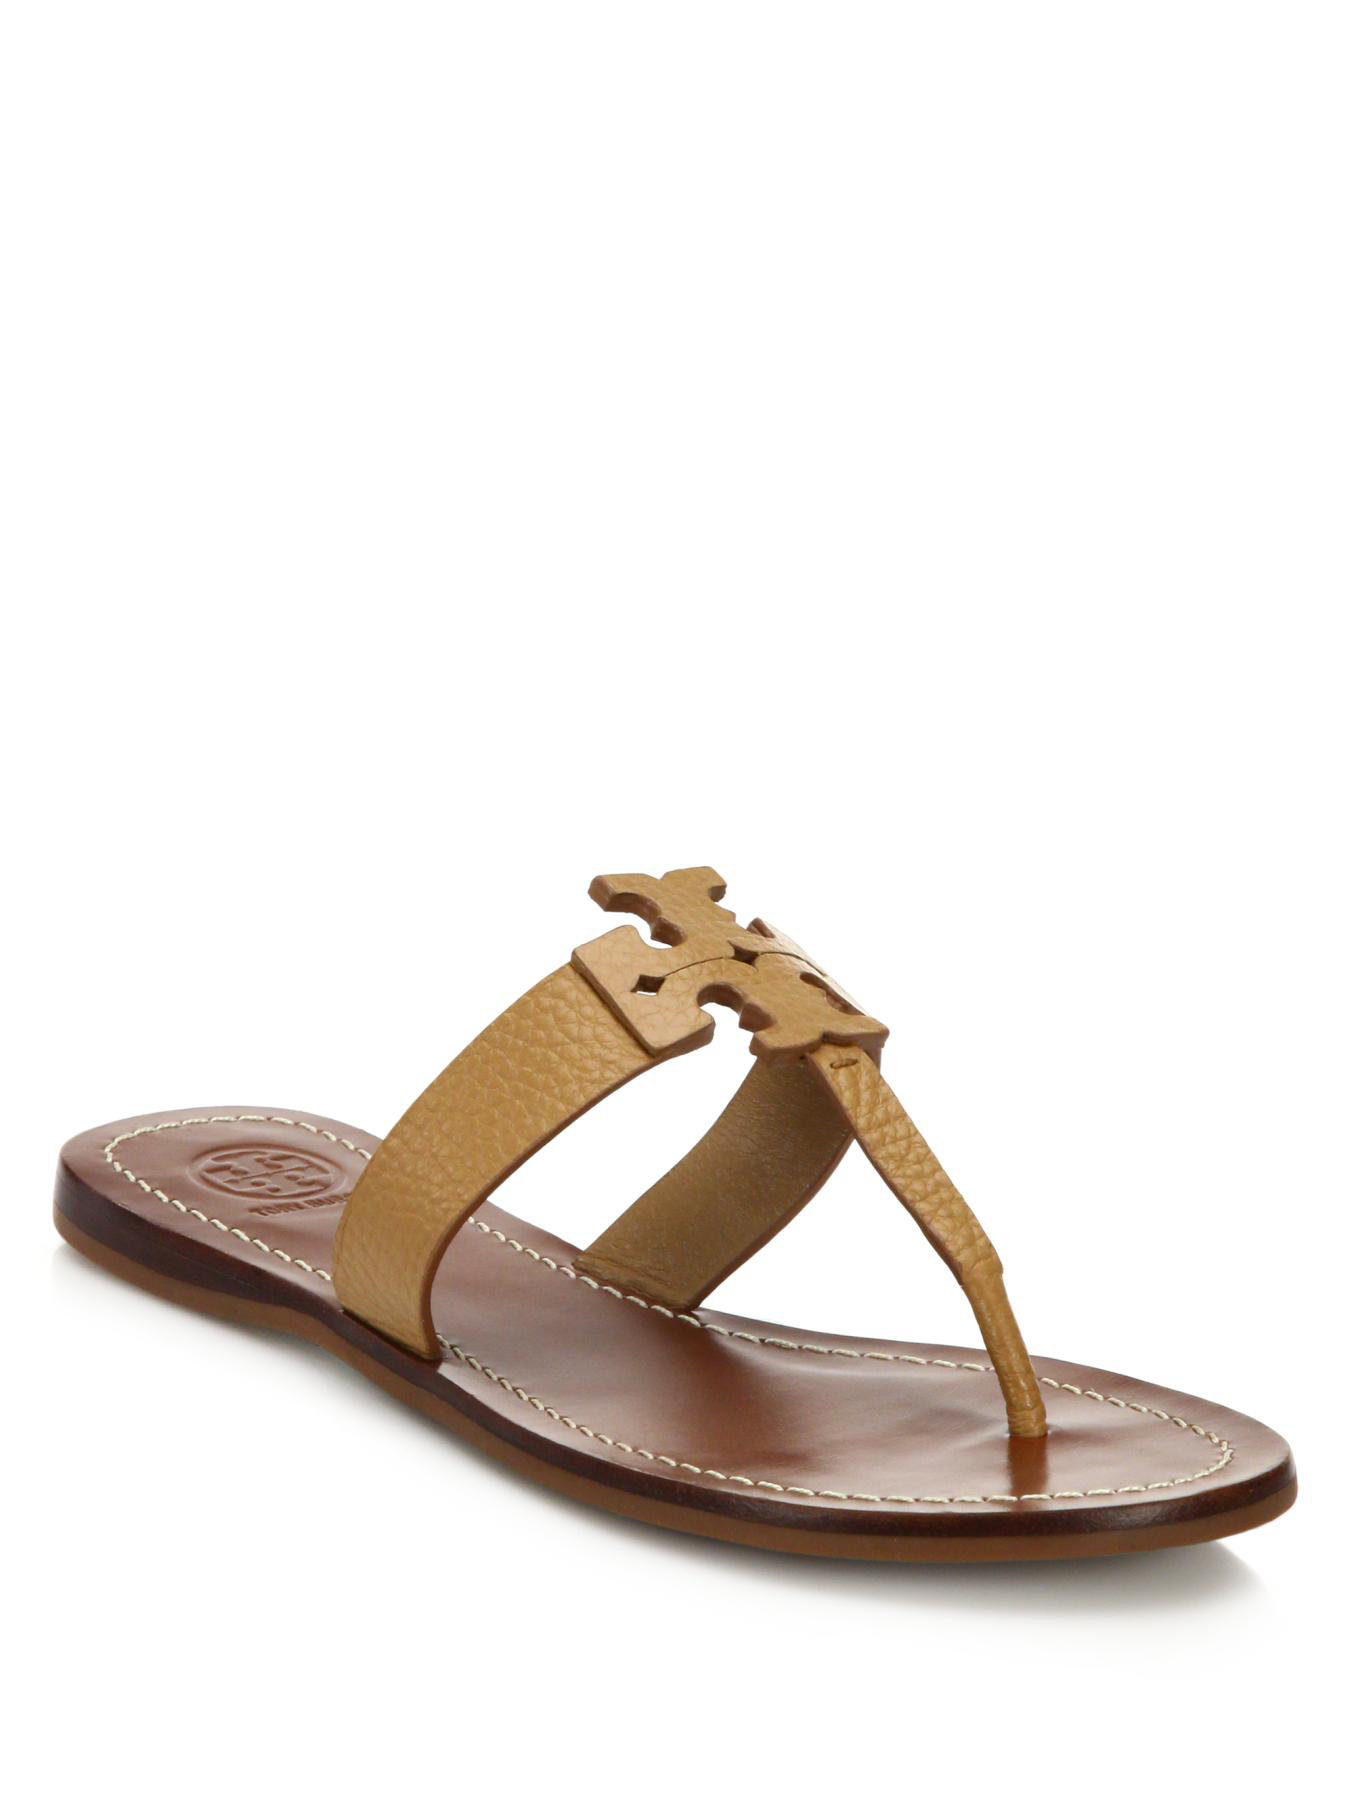 Lyst - Tory Burch Moore Leather Logo Flat Sandals in Brown